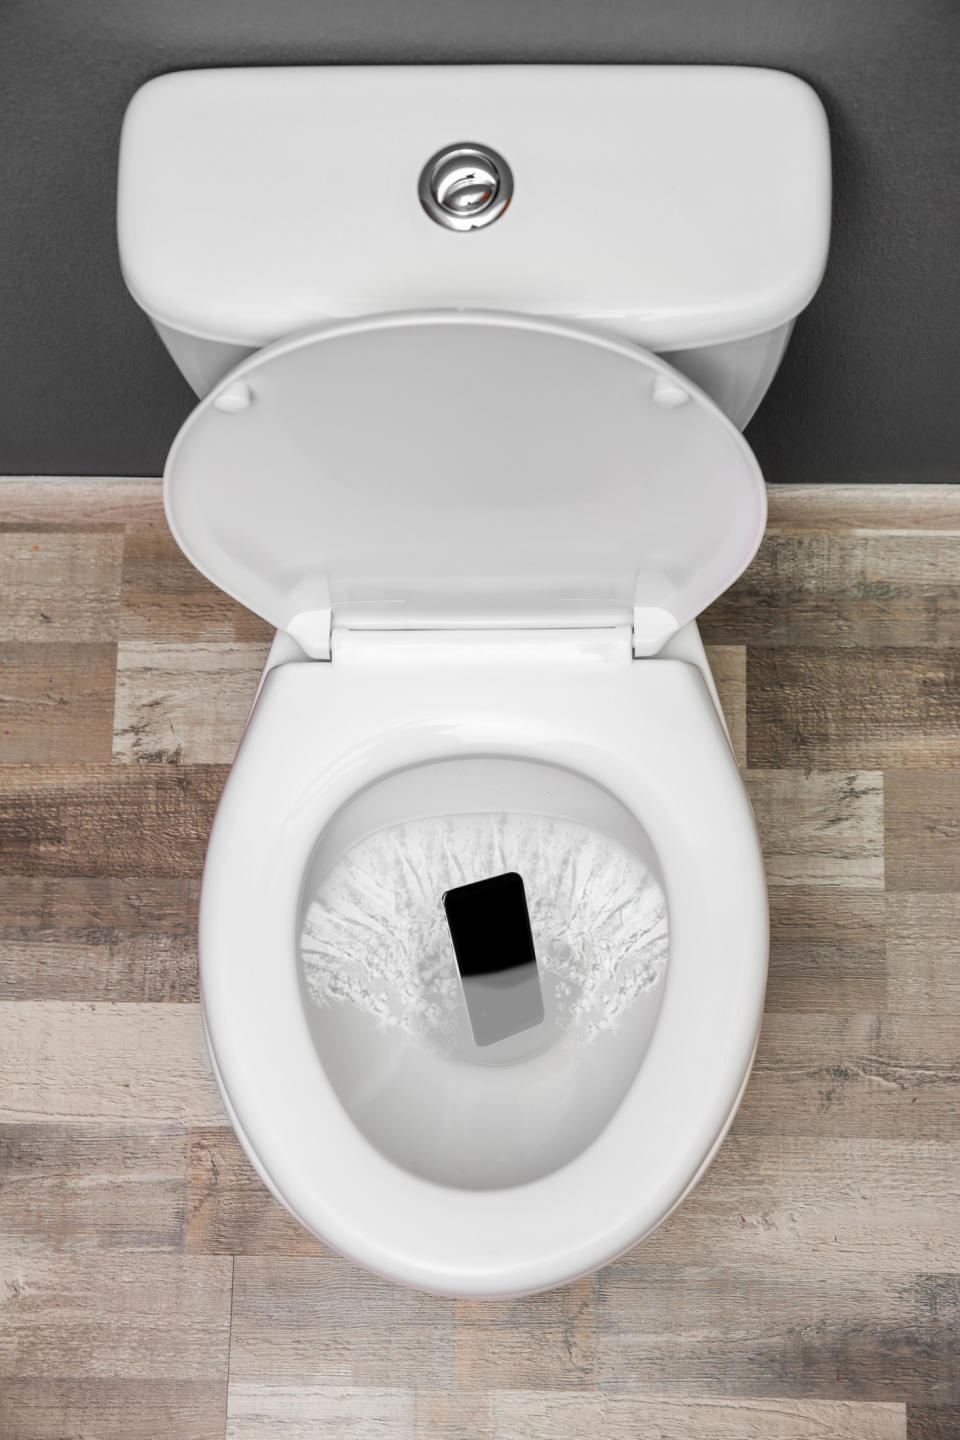 A smartphone is falling into a toilet bowl mid-flush, suggesting an accidental drop